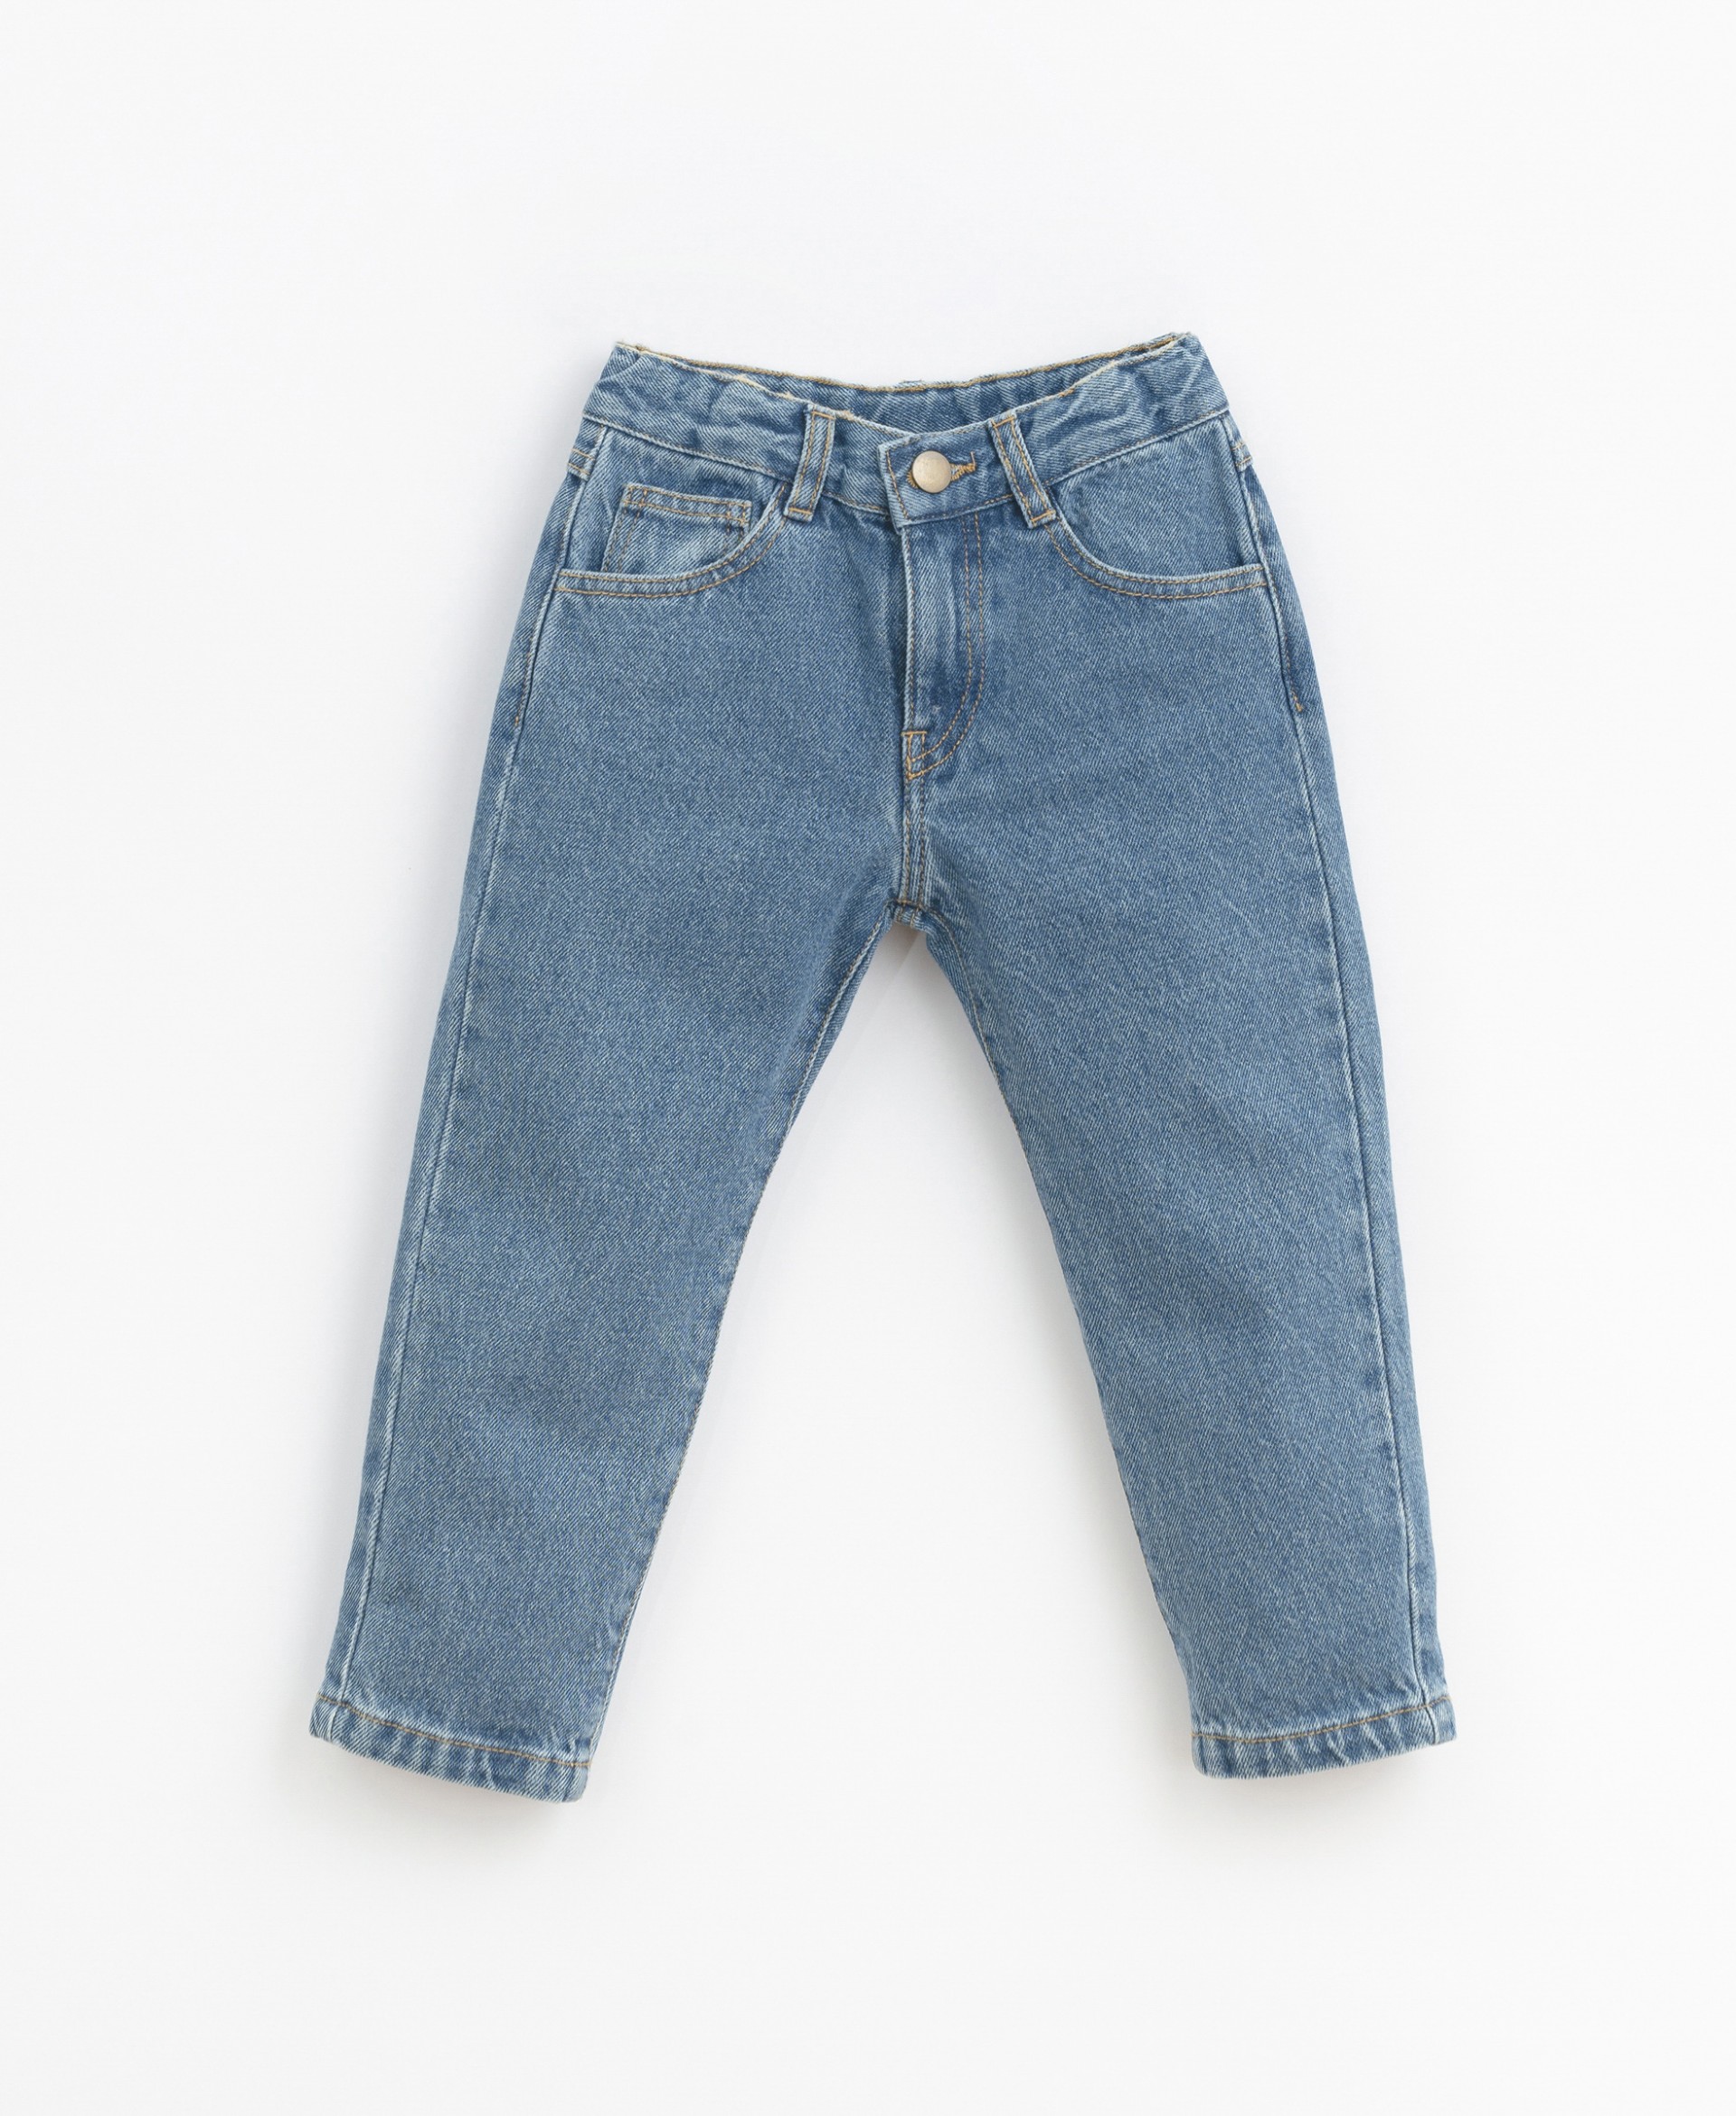 Denim pants with pockets | Basketry